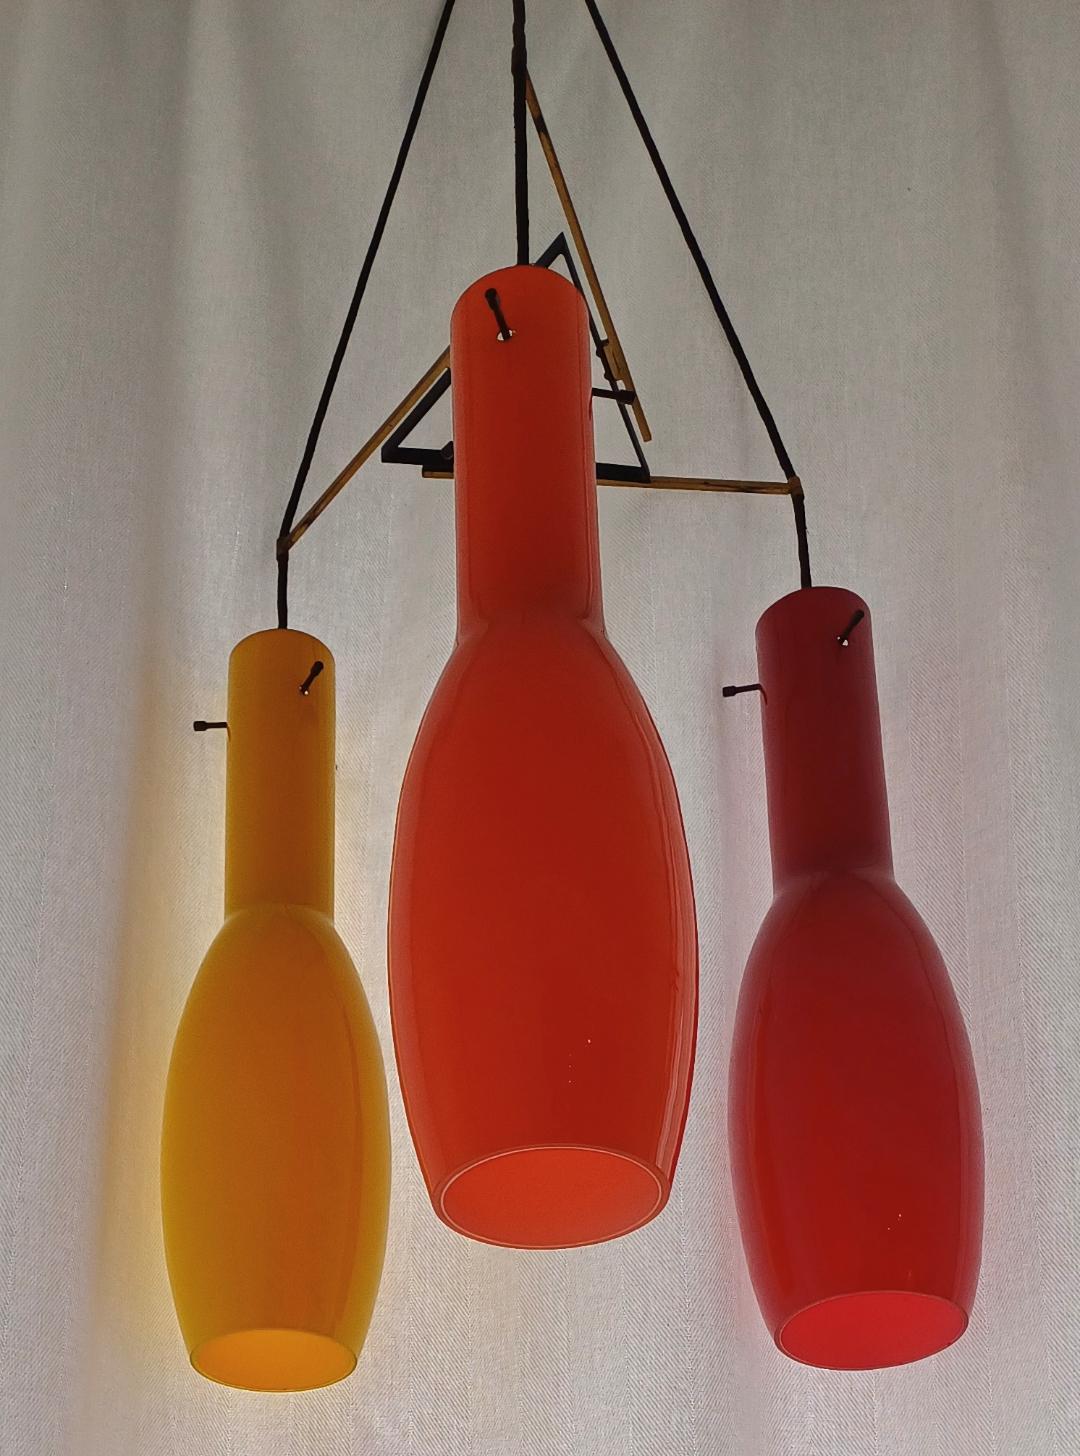 A set of three Murano glass ceiling lights, circa 1950s, In three different colours; red, yellow and orange. Mounted in a metal frame. Dimensions of the glass is 47 cm high and 9.5 cm in diameter.